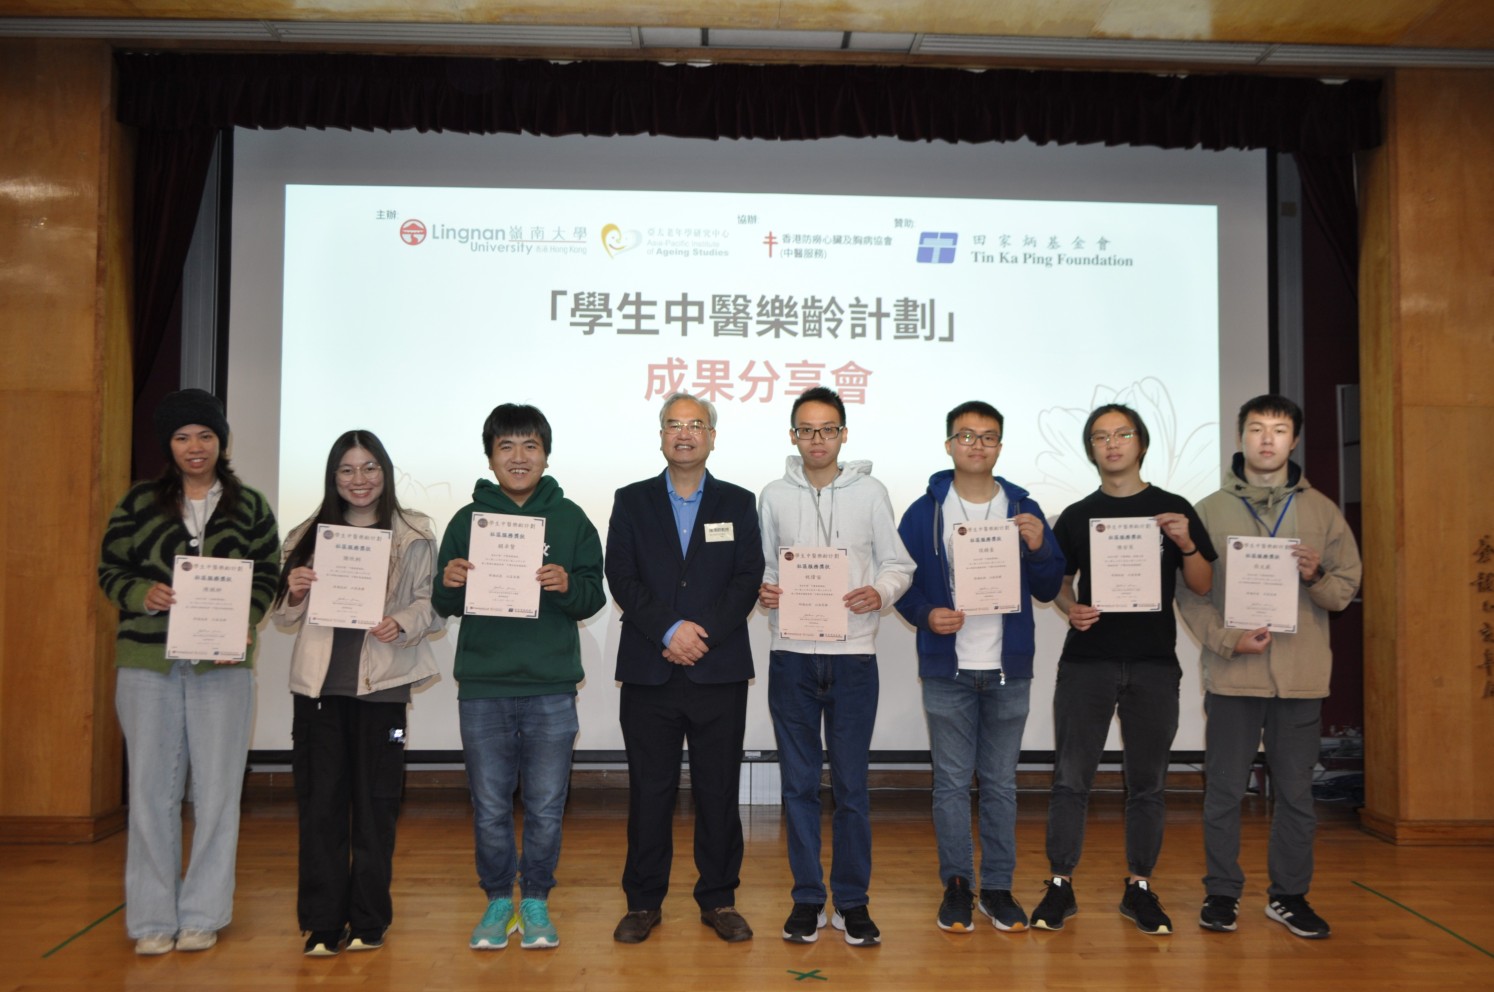 Lingnan University’s Chinese Medicine Promotion Leaders, and Chinese Medicine Youth Health Ambassadors from Yan Oi Tong Chan Wong Suk Fong Memorial Secondary School, CCC Fong Yun Wah Secondary School, and Delia Memorial School (Hip Wo No.2 College) receive certificates and service awards.